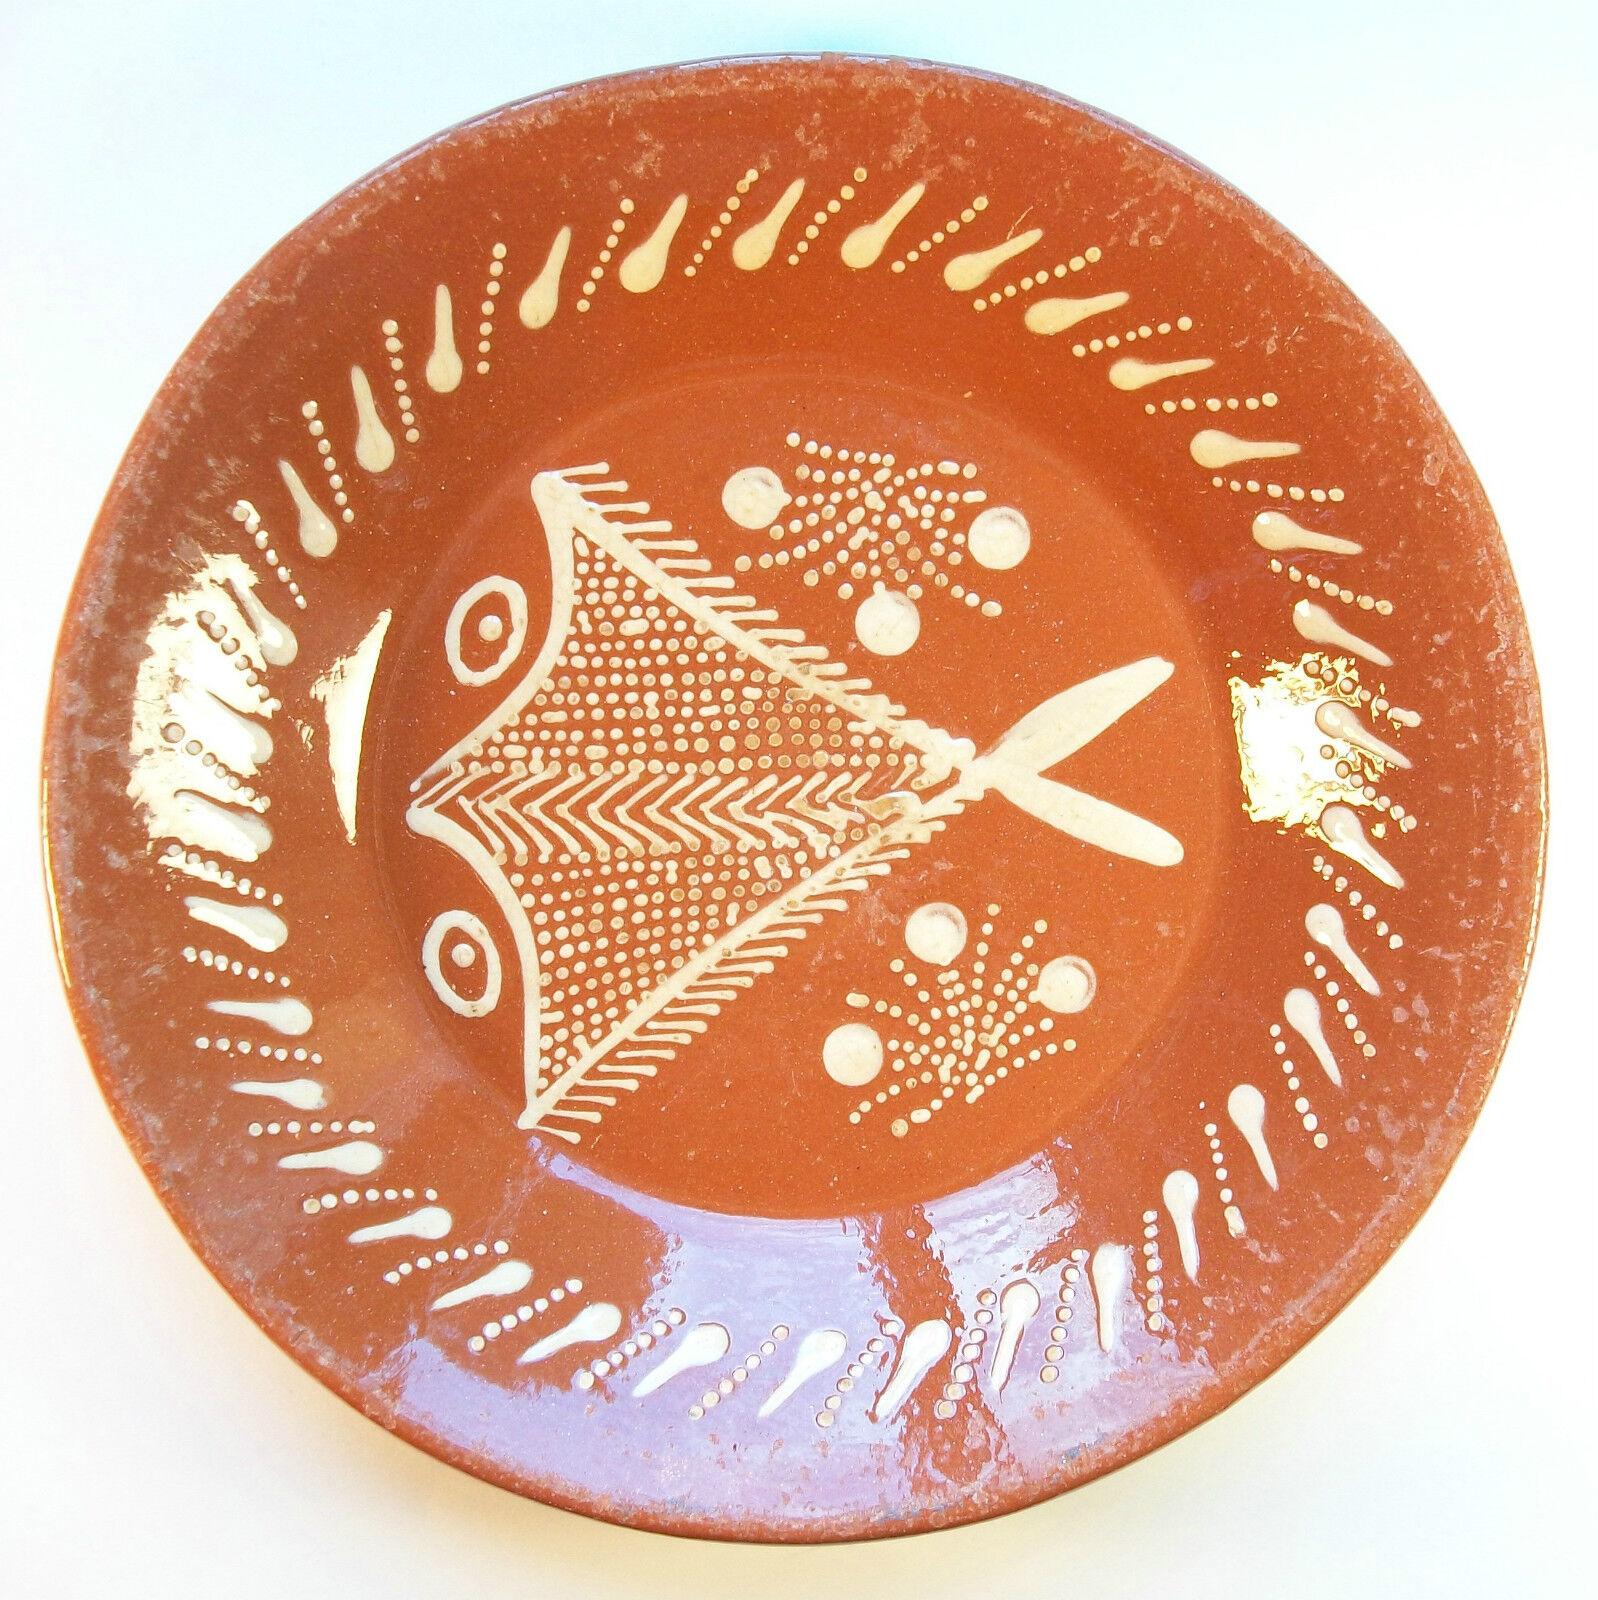 Vintage Continental Terracotta Slipware Decorated Dish, Signed, 20th Century For Sale 2